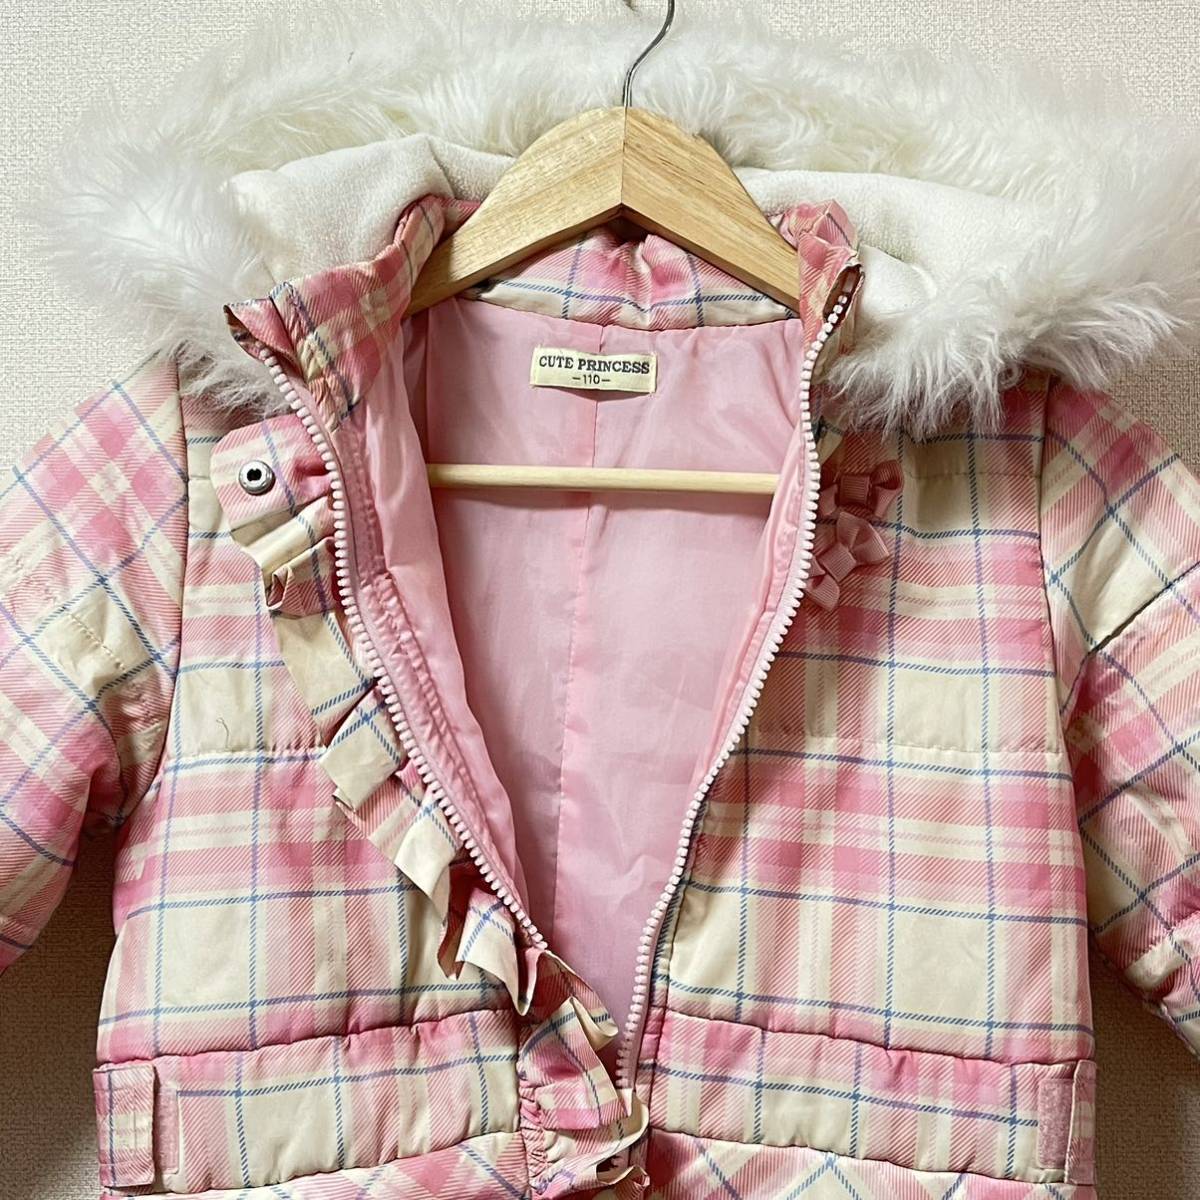 [CUTE PRINCESS] cute Princess snow wear pink check pattern ribbon frill fur protection against cold snow Kids size 110/Y2389 SS